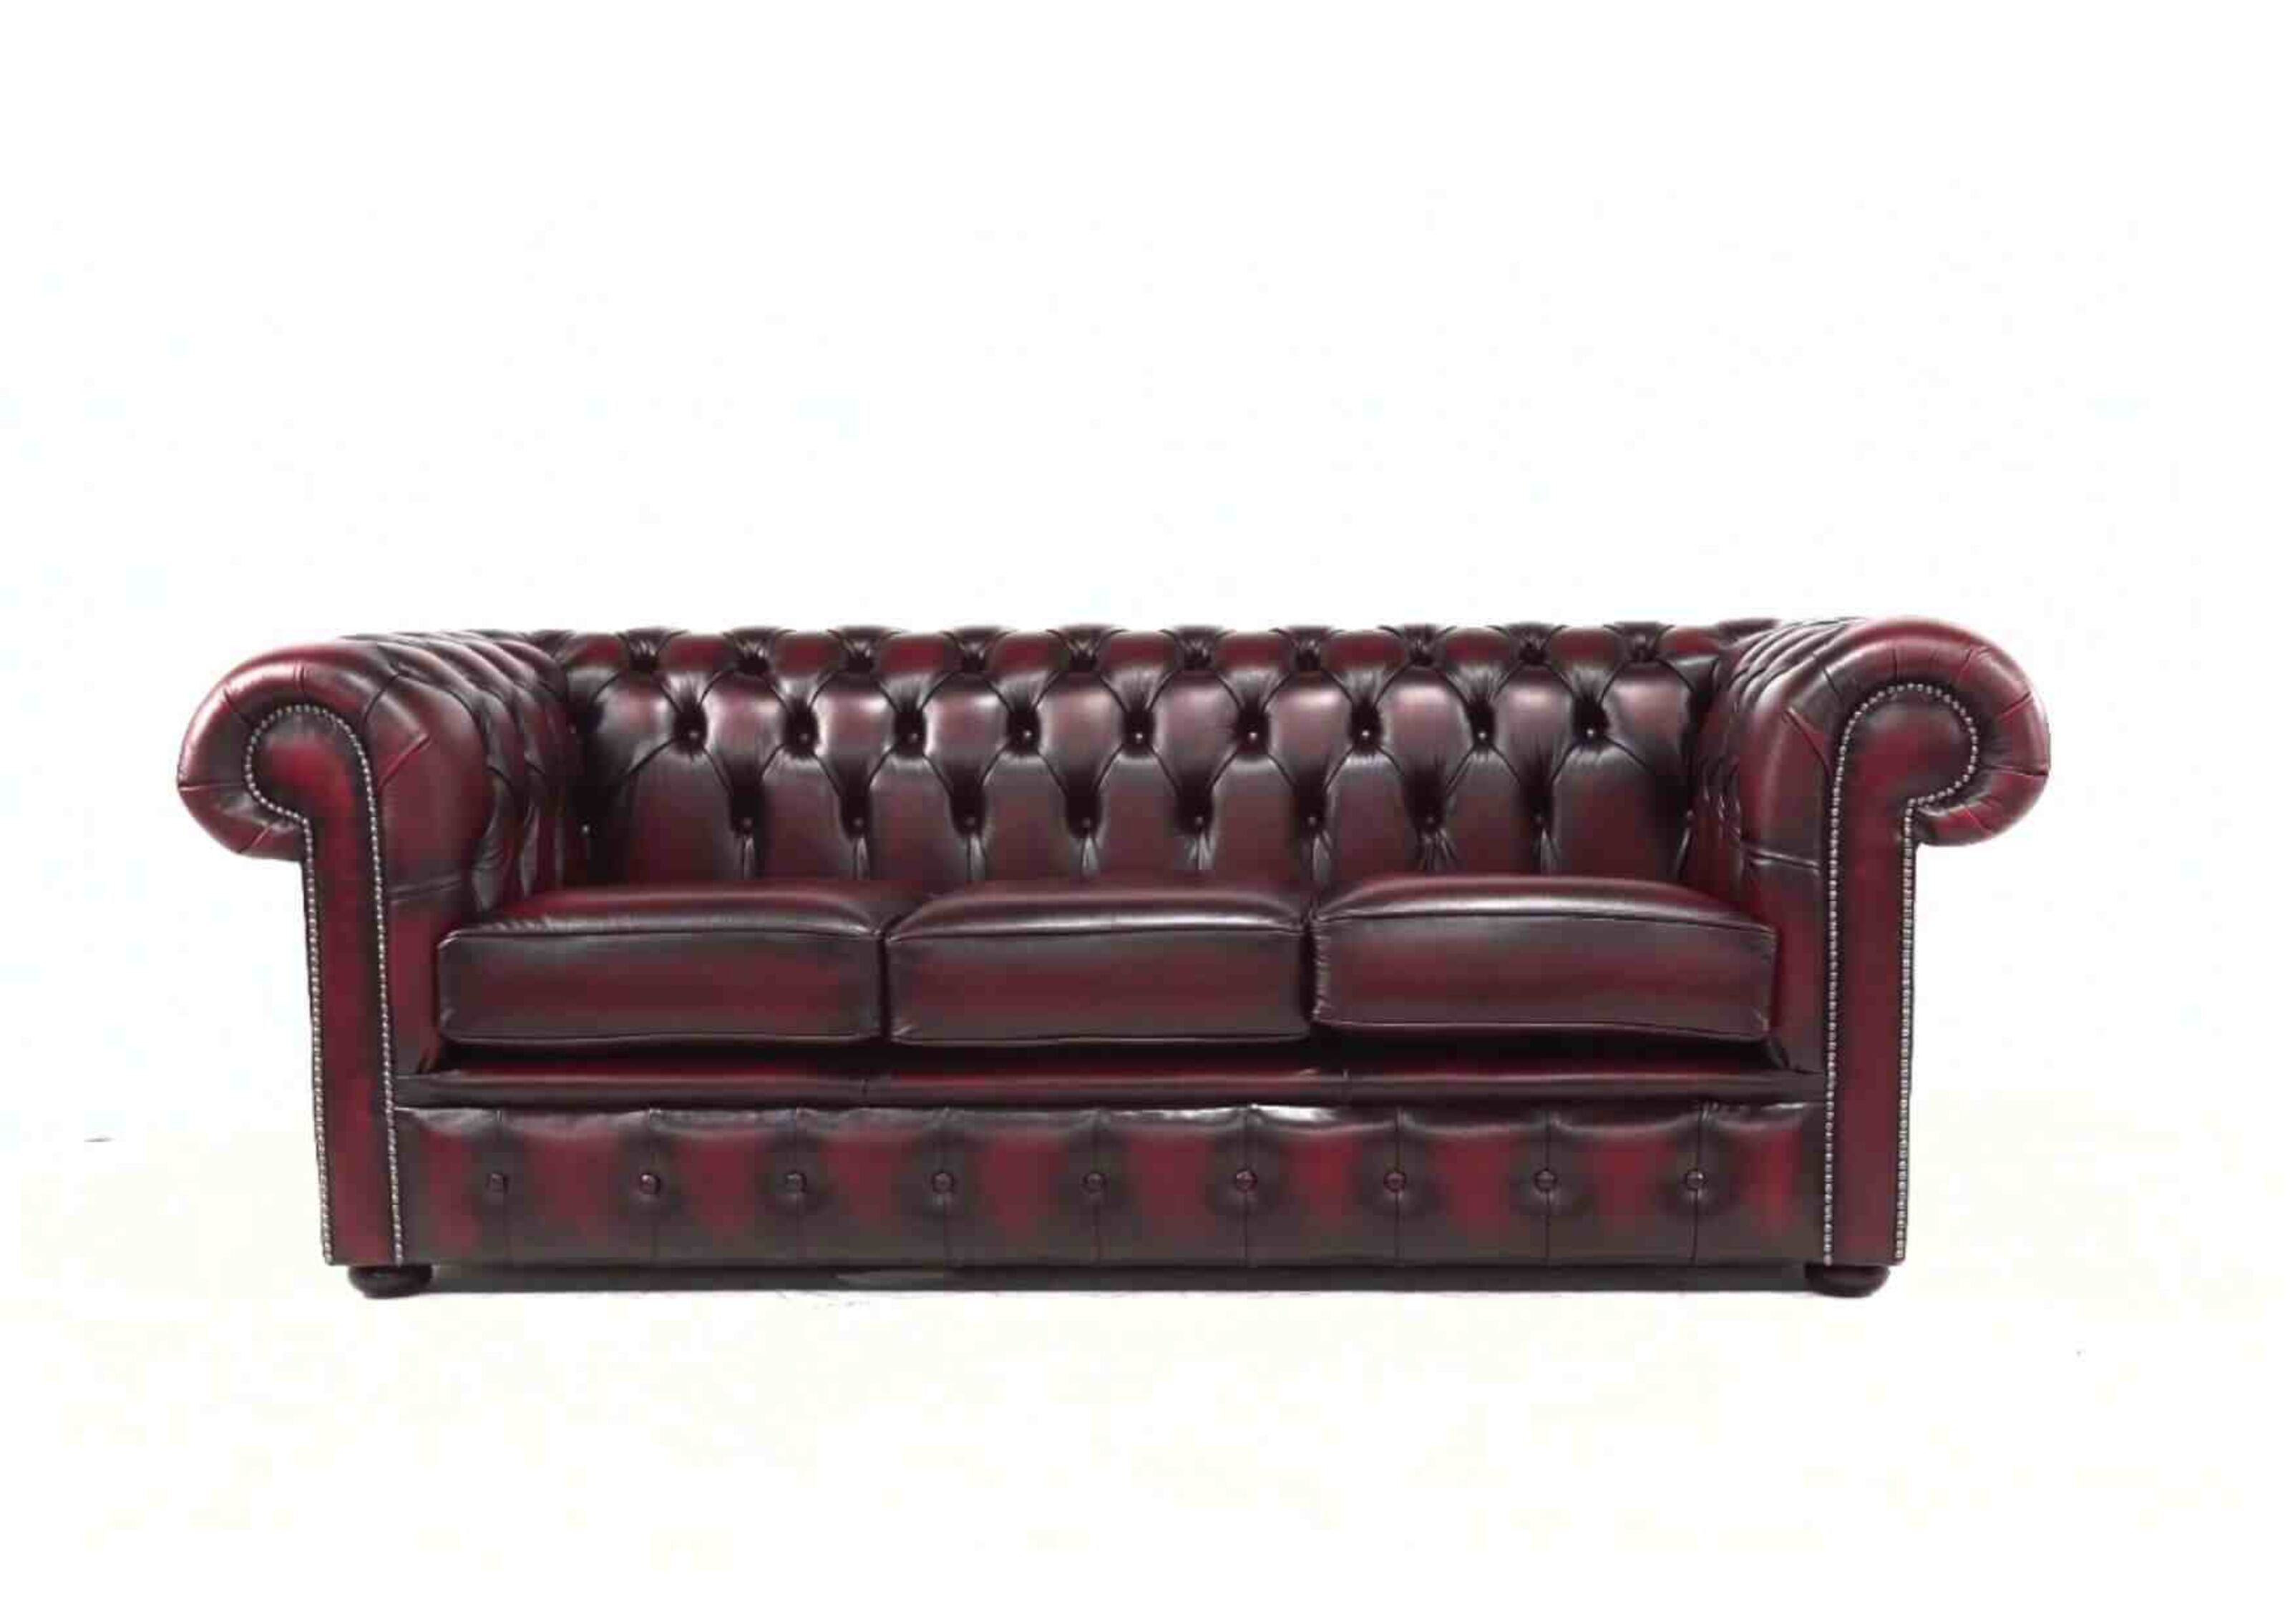 Leather Luxury Exploring Chesterfield Sofas in Leather Upholstery  %Post Title